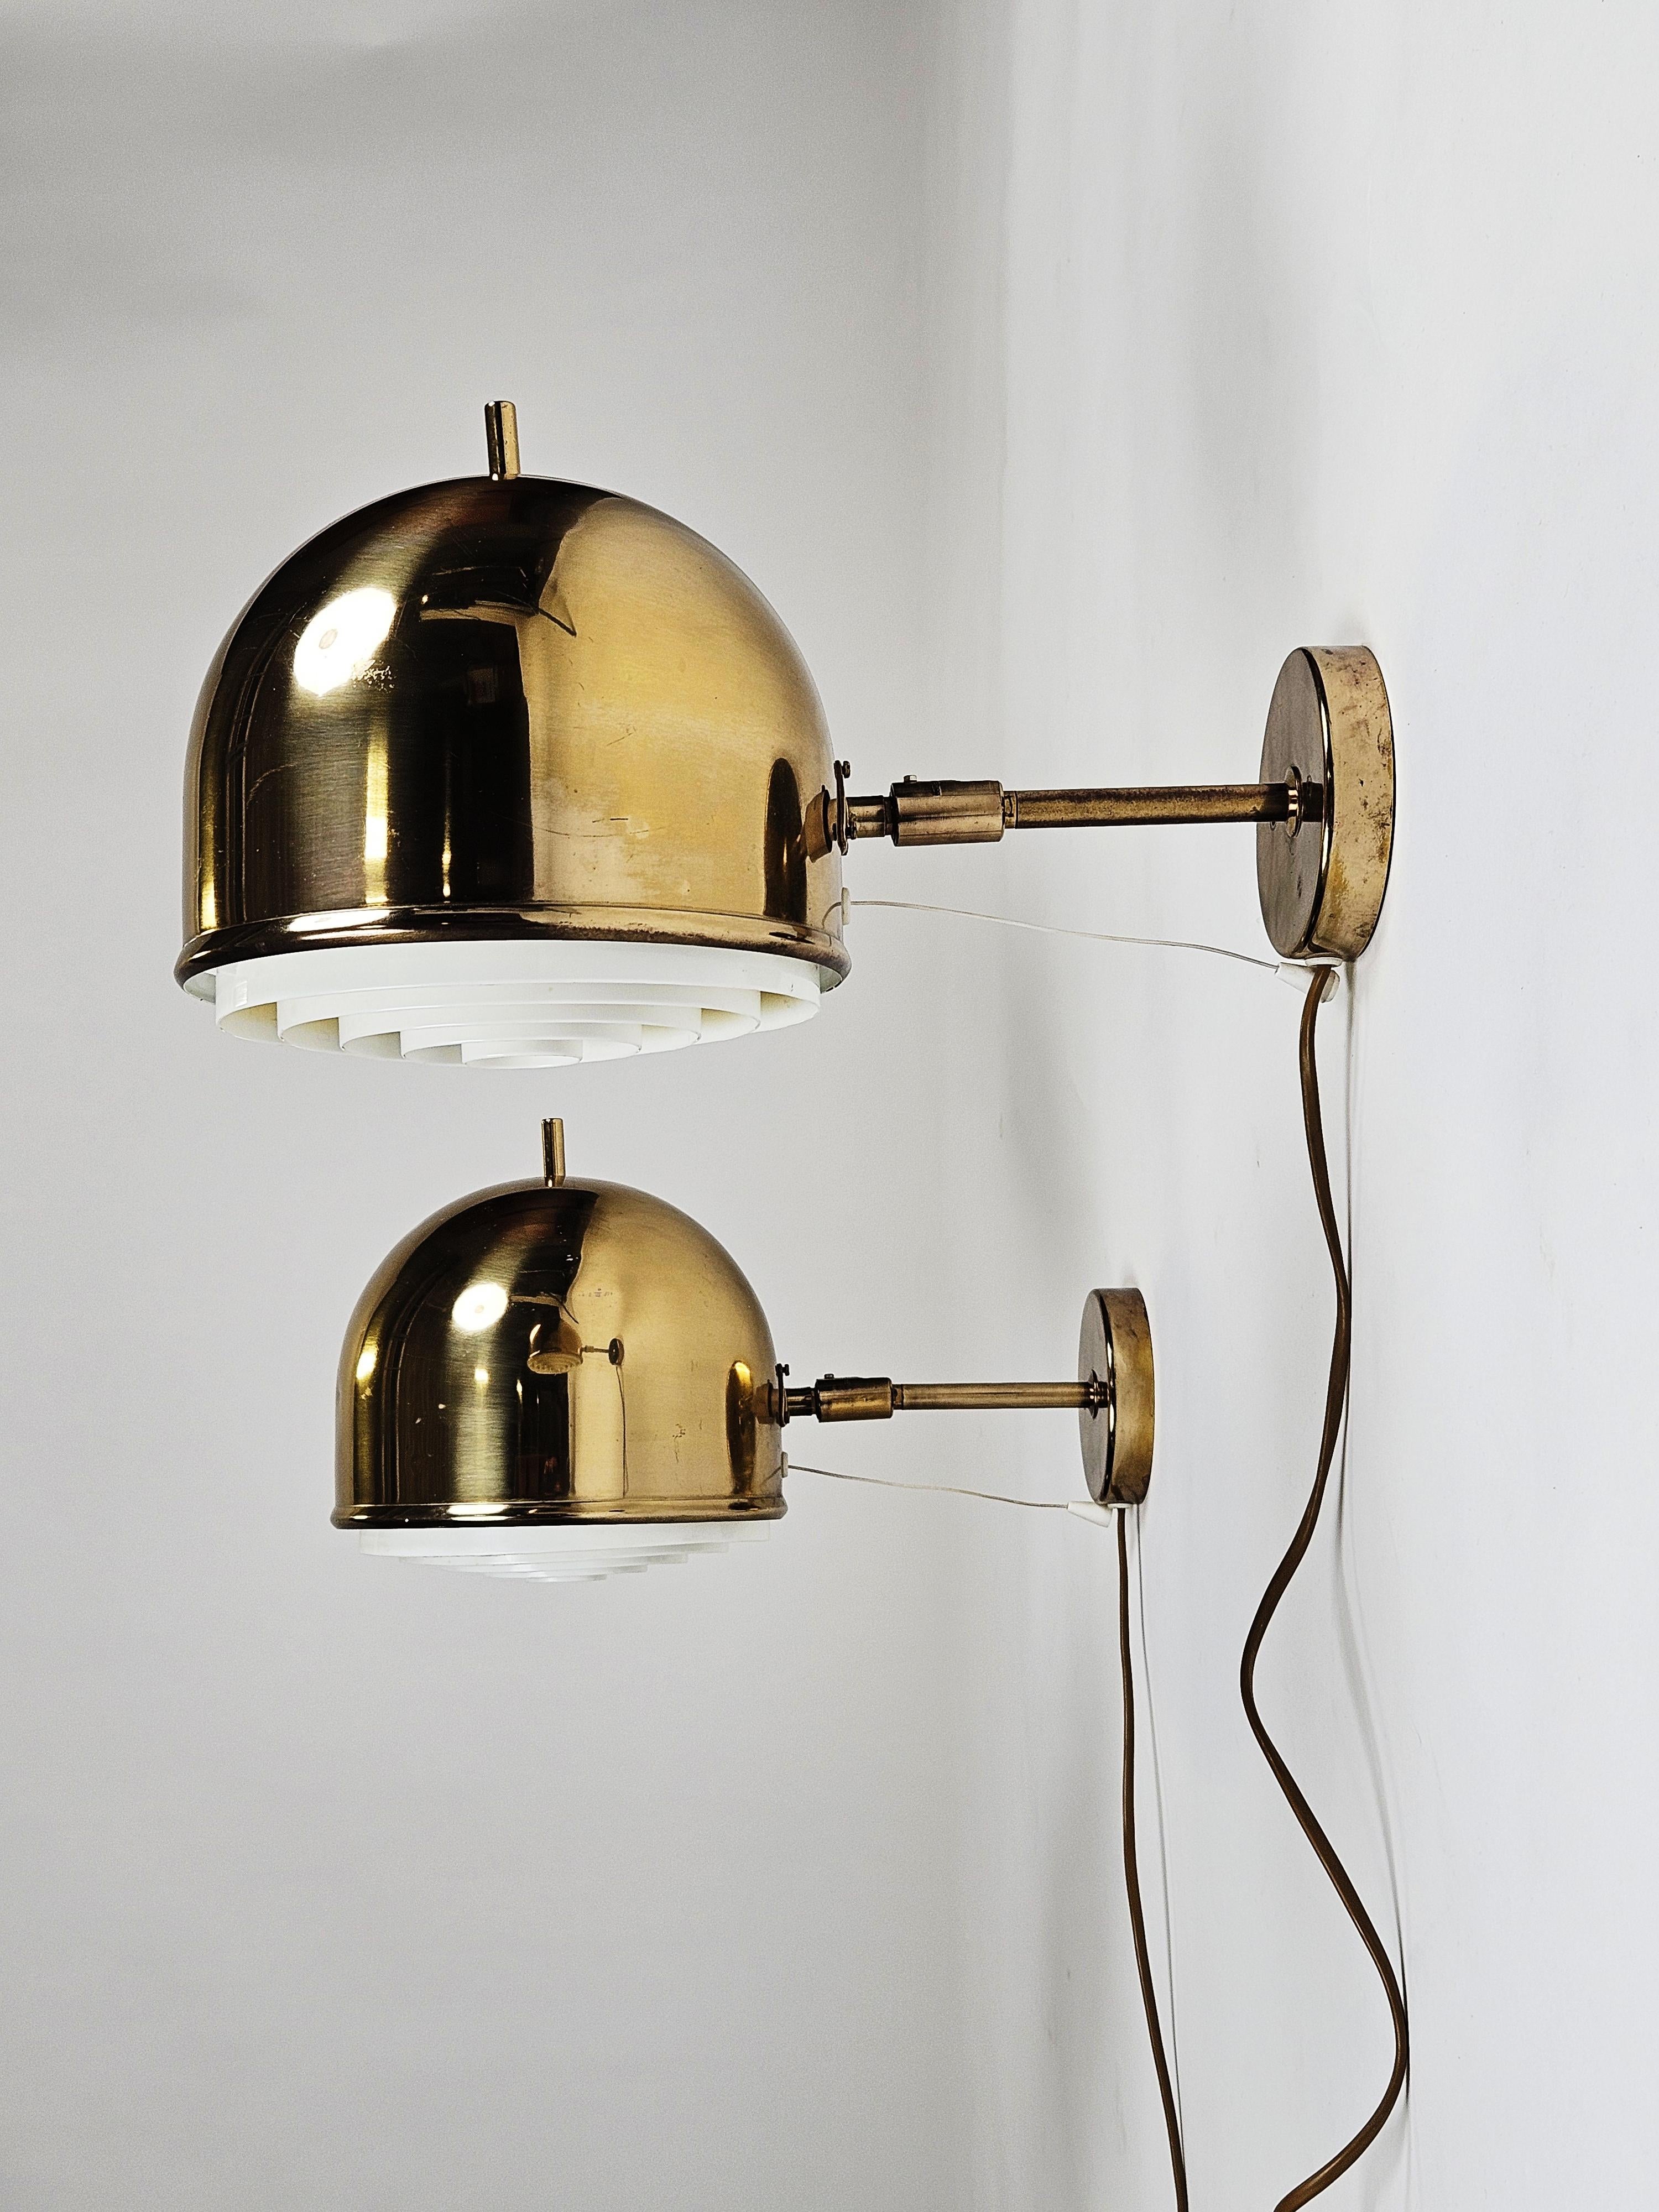 Wall lamps designed by Eje Ahlgren model 'V75S' produced by Bergboms, Sweden, during the 1960s. 

Adjustable. Rare model, made in brass and plastic. 

Some dents and stains on brass. 